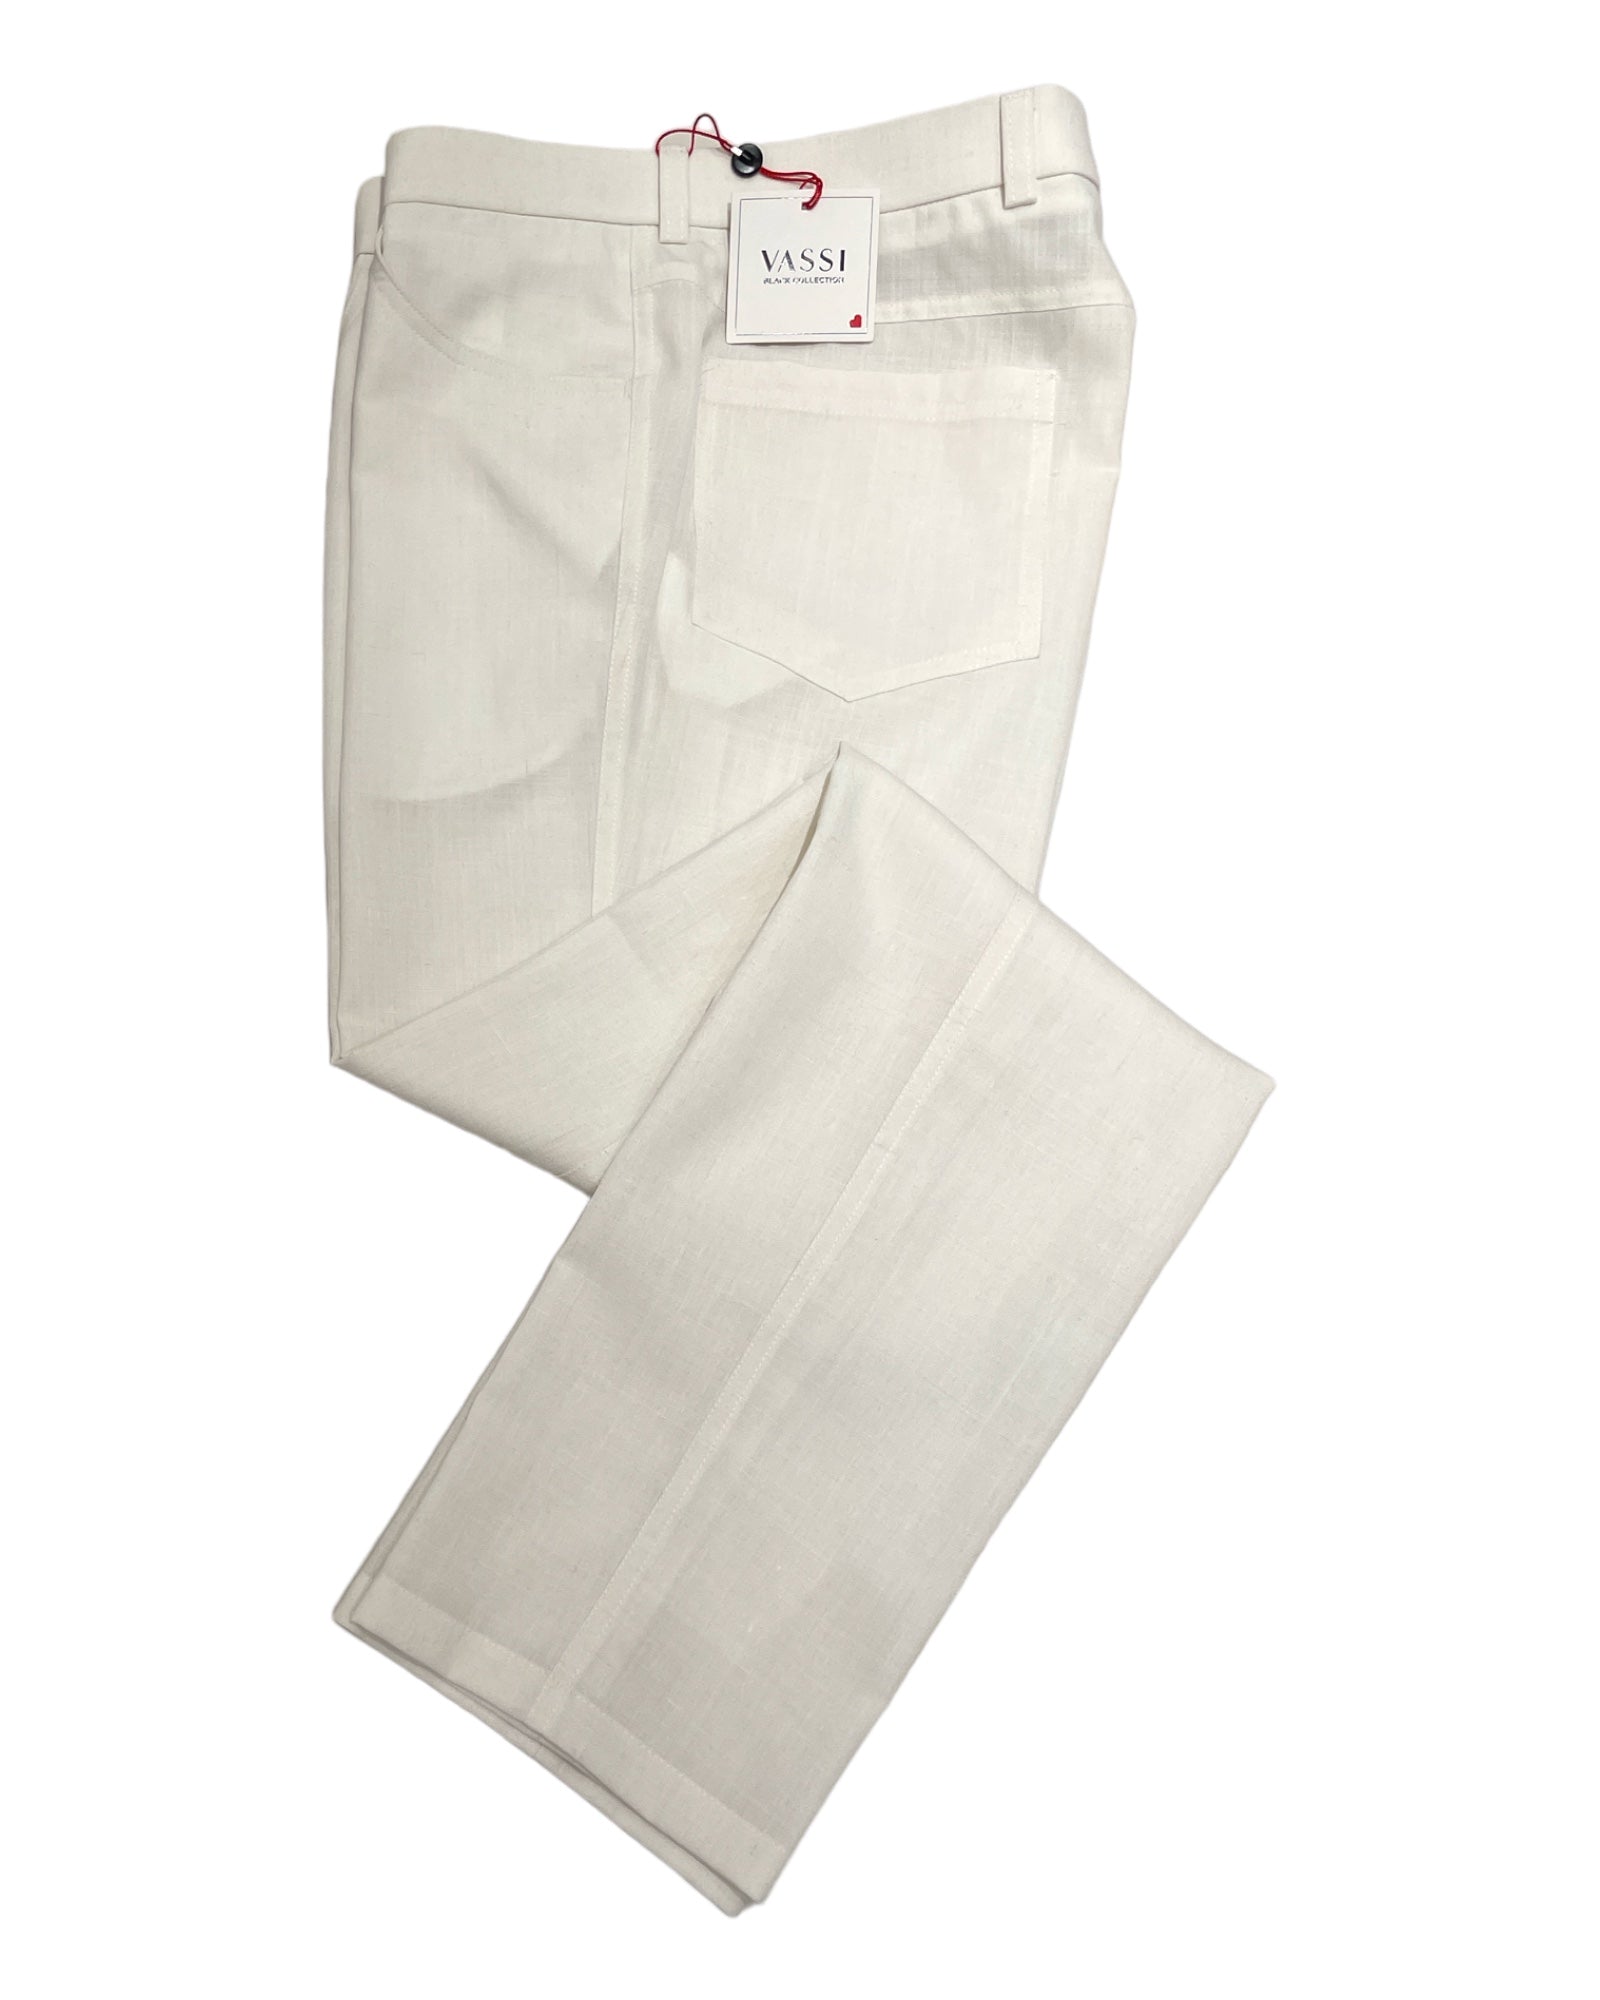 Easy Care Linen 5-Pocket Pants in White CASUAL PANTS32